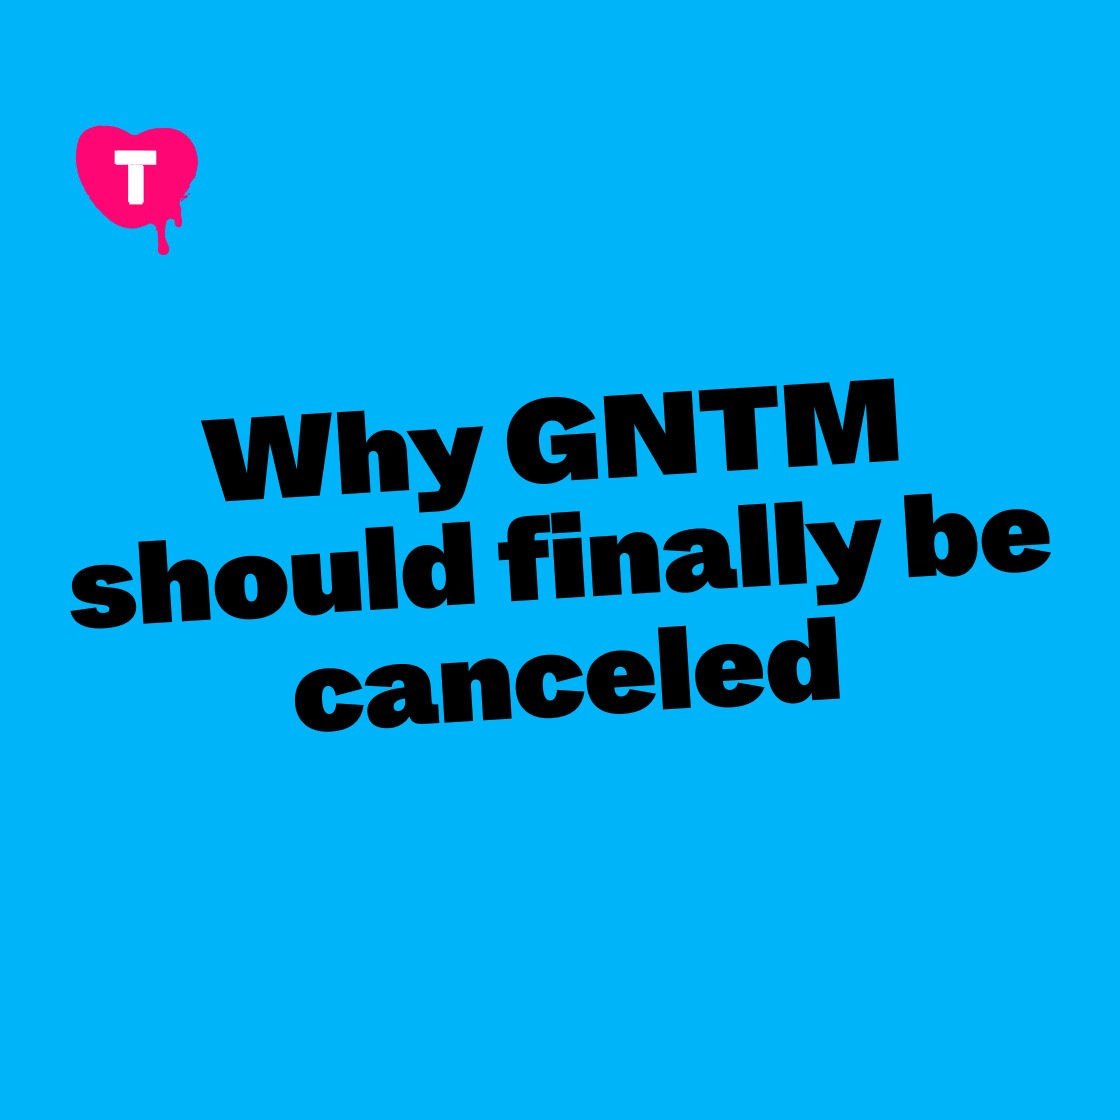 Why GNTM should finally be canceled